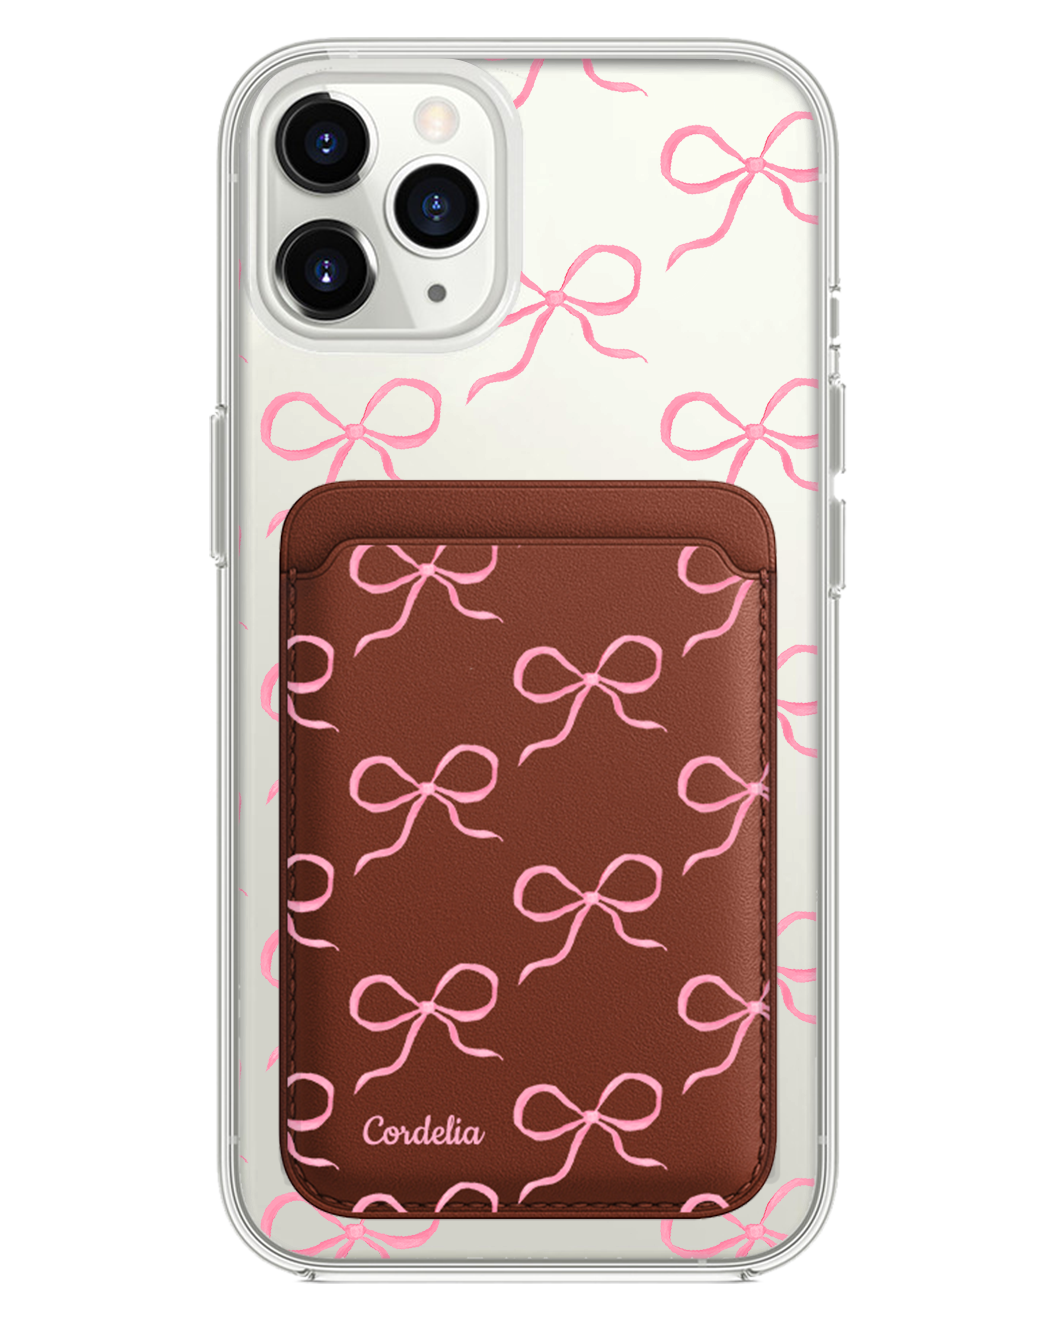 iPhone Magnetic Wallet Case - Coquette Pink Bow 1.0